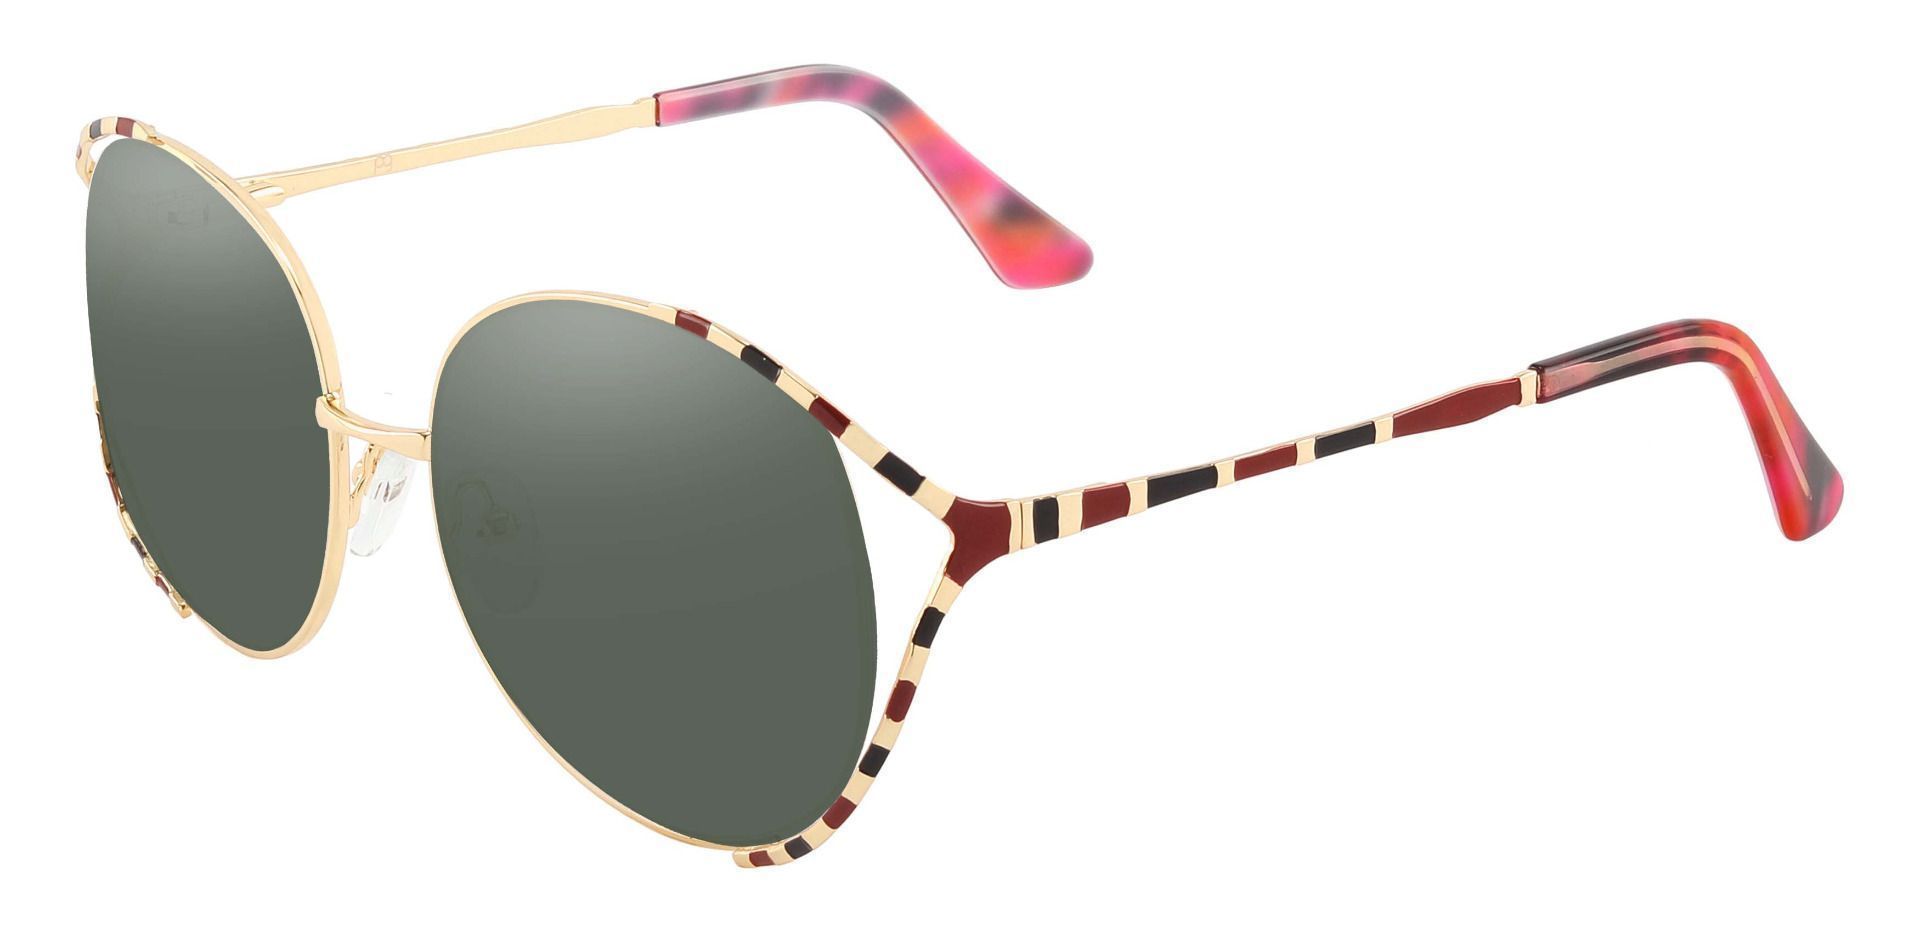 Dorothy Oval Non-Rx Sunglasses - Pink Frame With Green Lenses